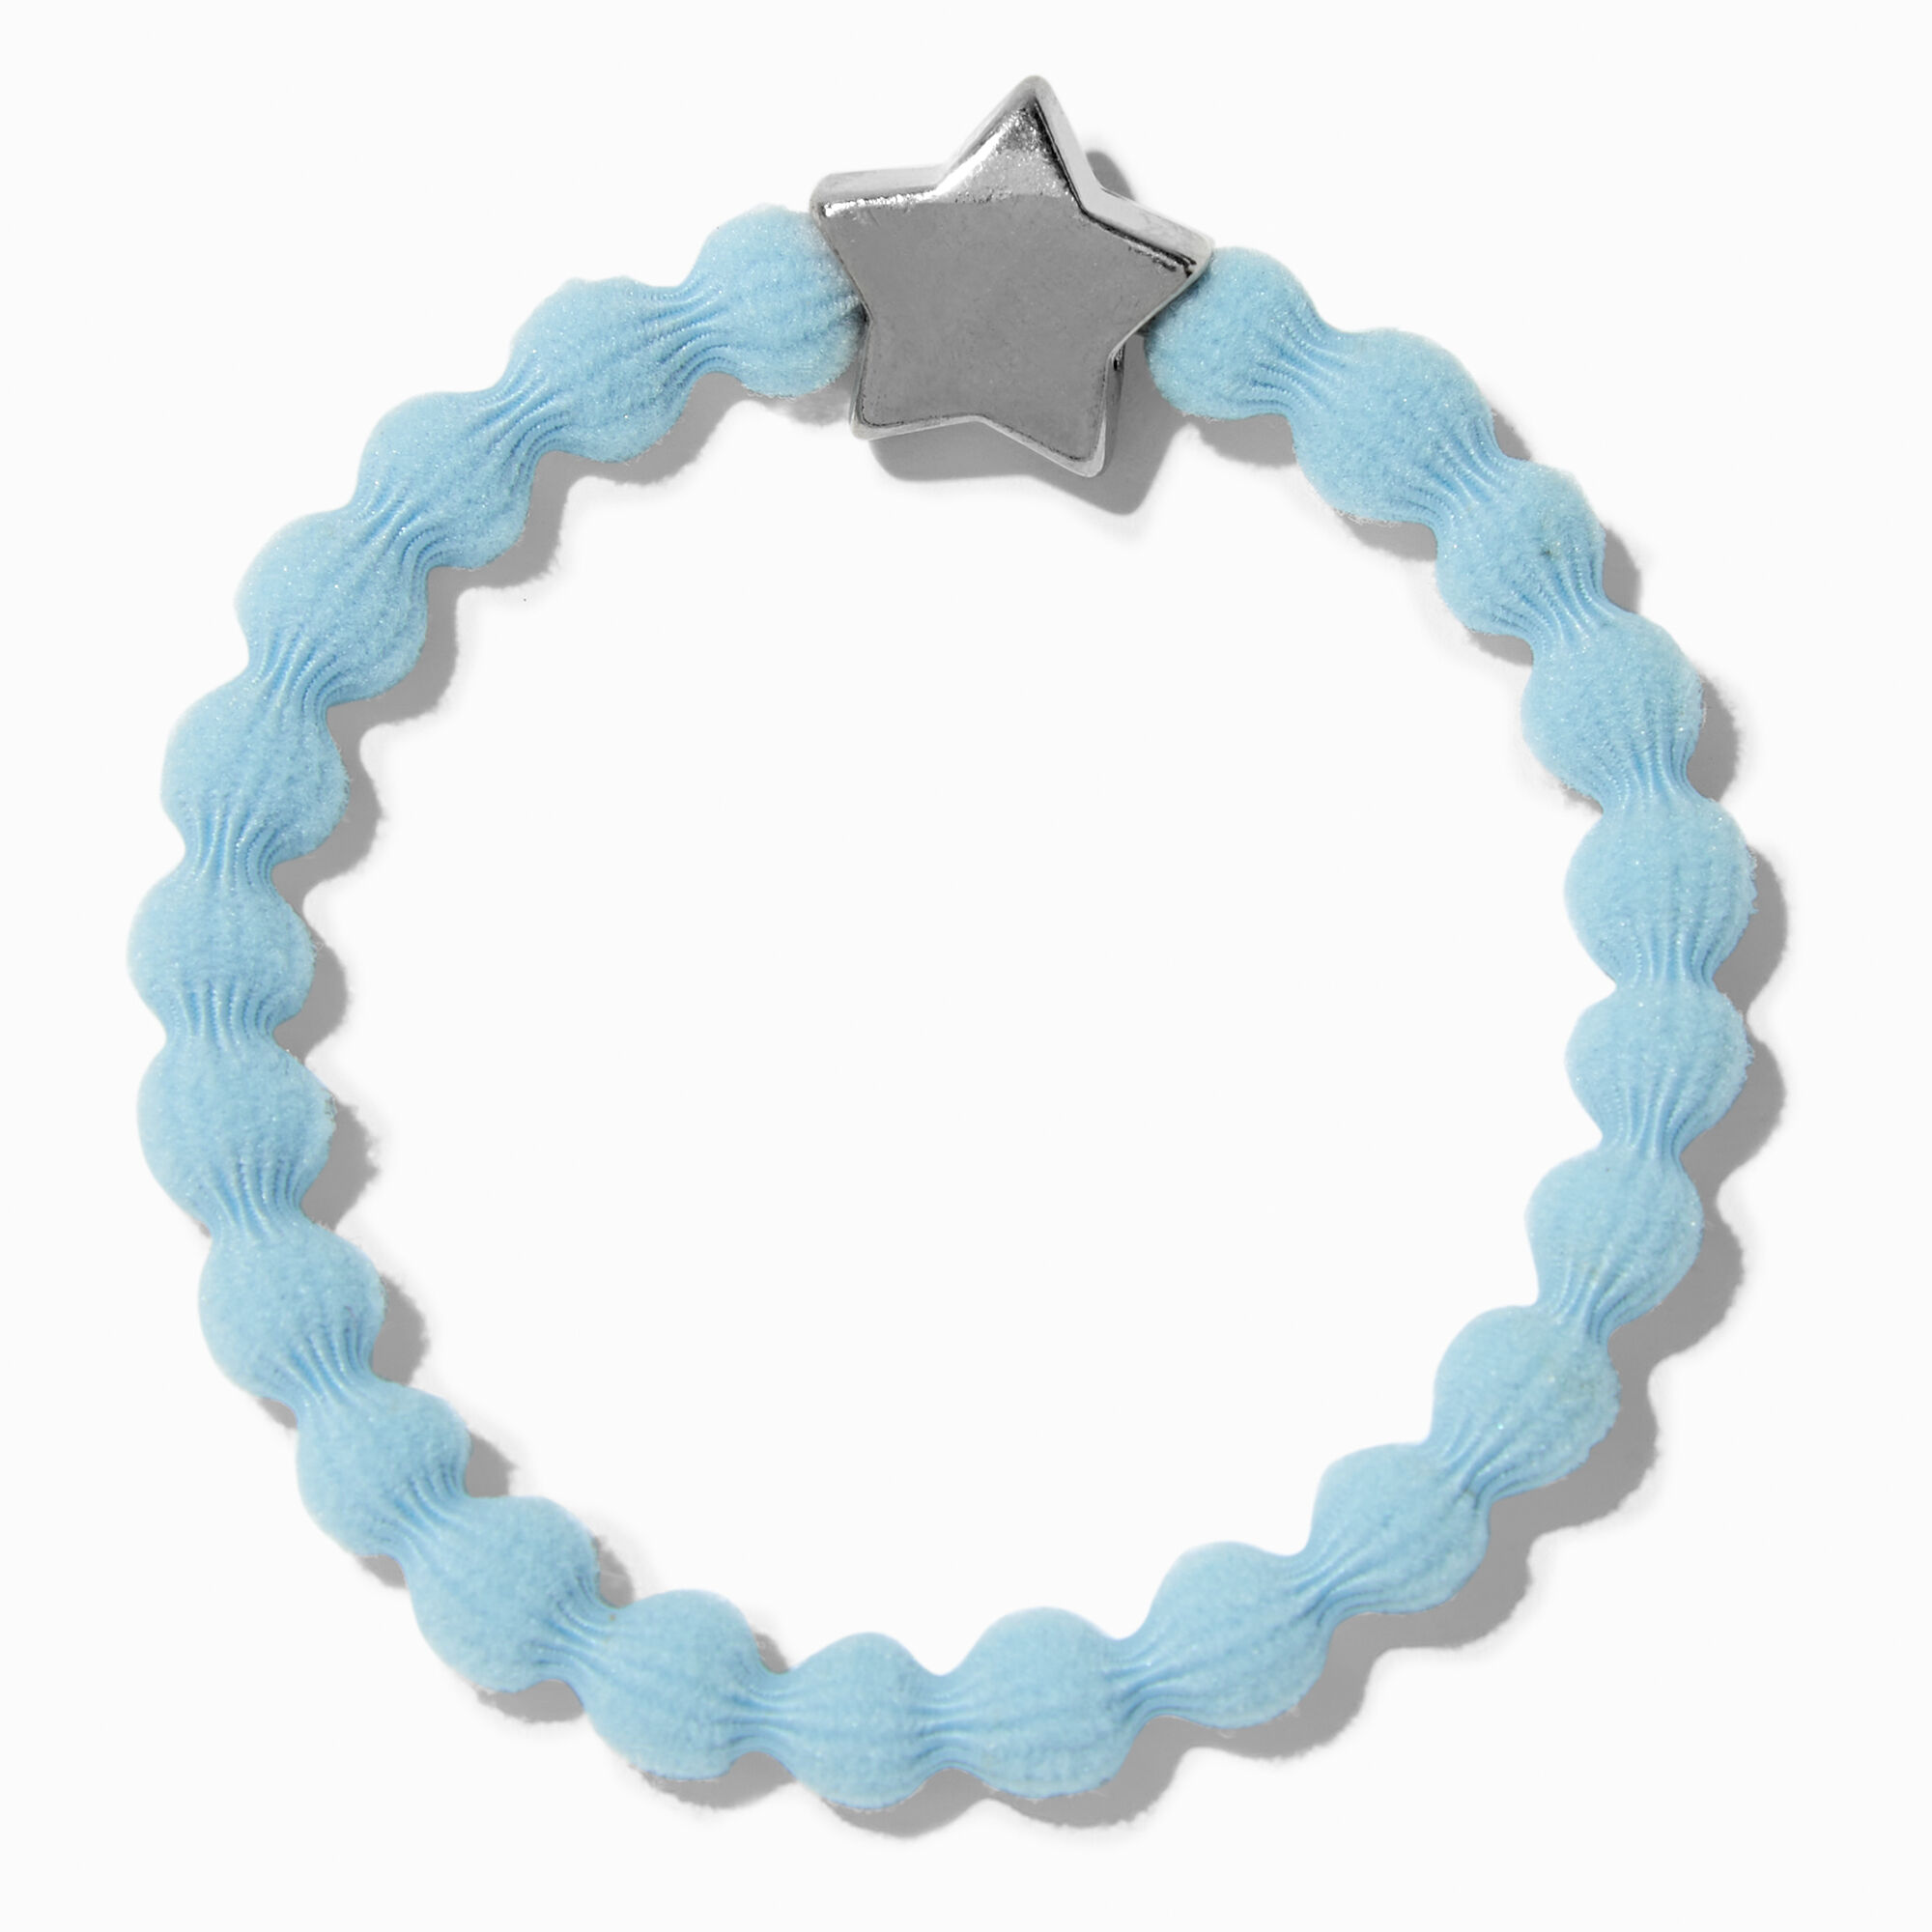 View Claires SilverTone Star Woven Beaded Stretch Bracelet Light Blue information